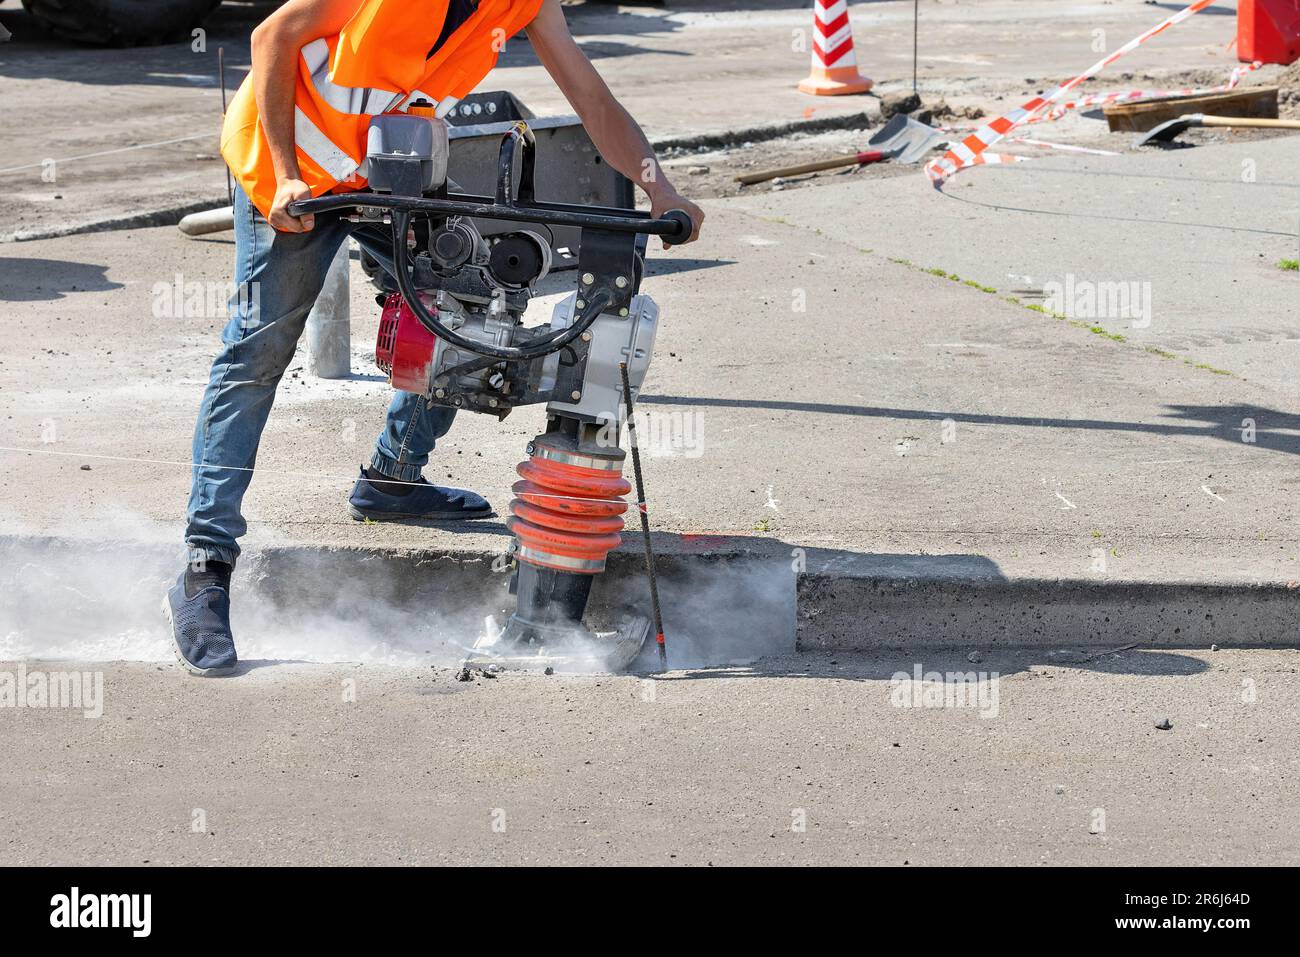 A construction worker is ramming a trench with a vibrating rammer at a construction site and kicking up a cloud of dust around him. Stock Photo